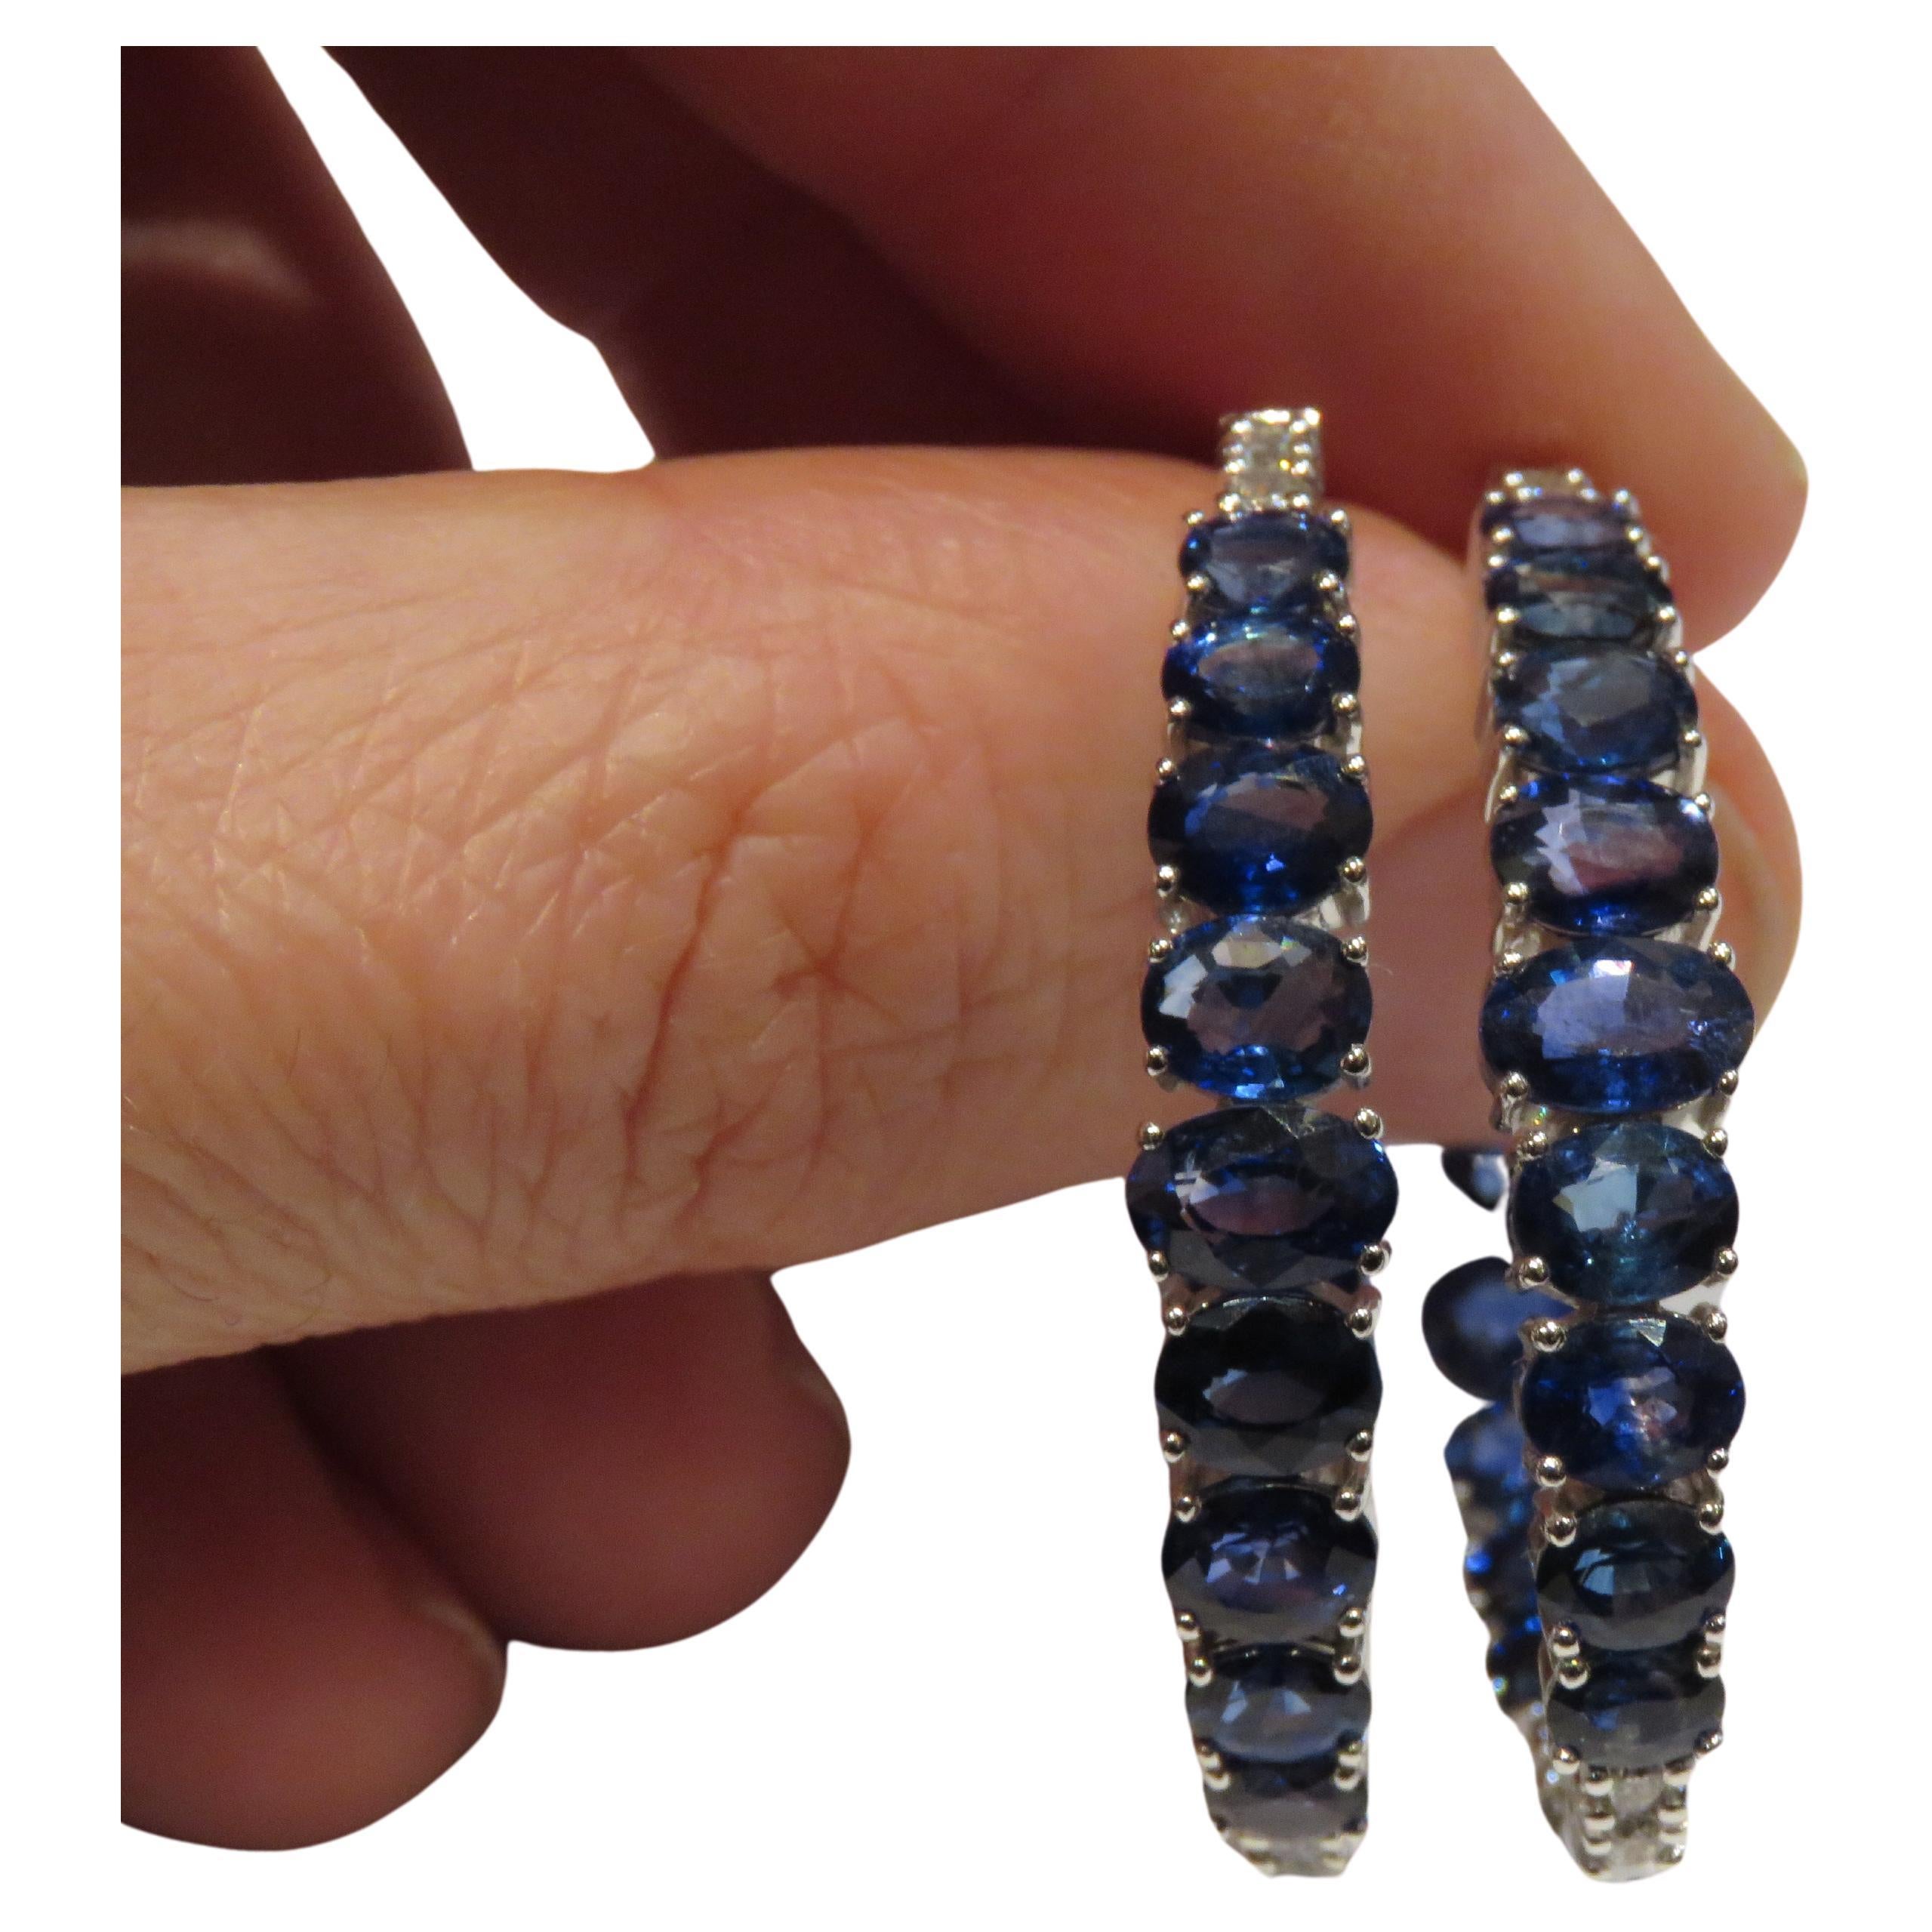 NWT $12, 500 Exquisite 18KT Magnificent Fancy Blue Sapphire Diamond Hoop Earring For Sale